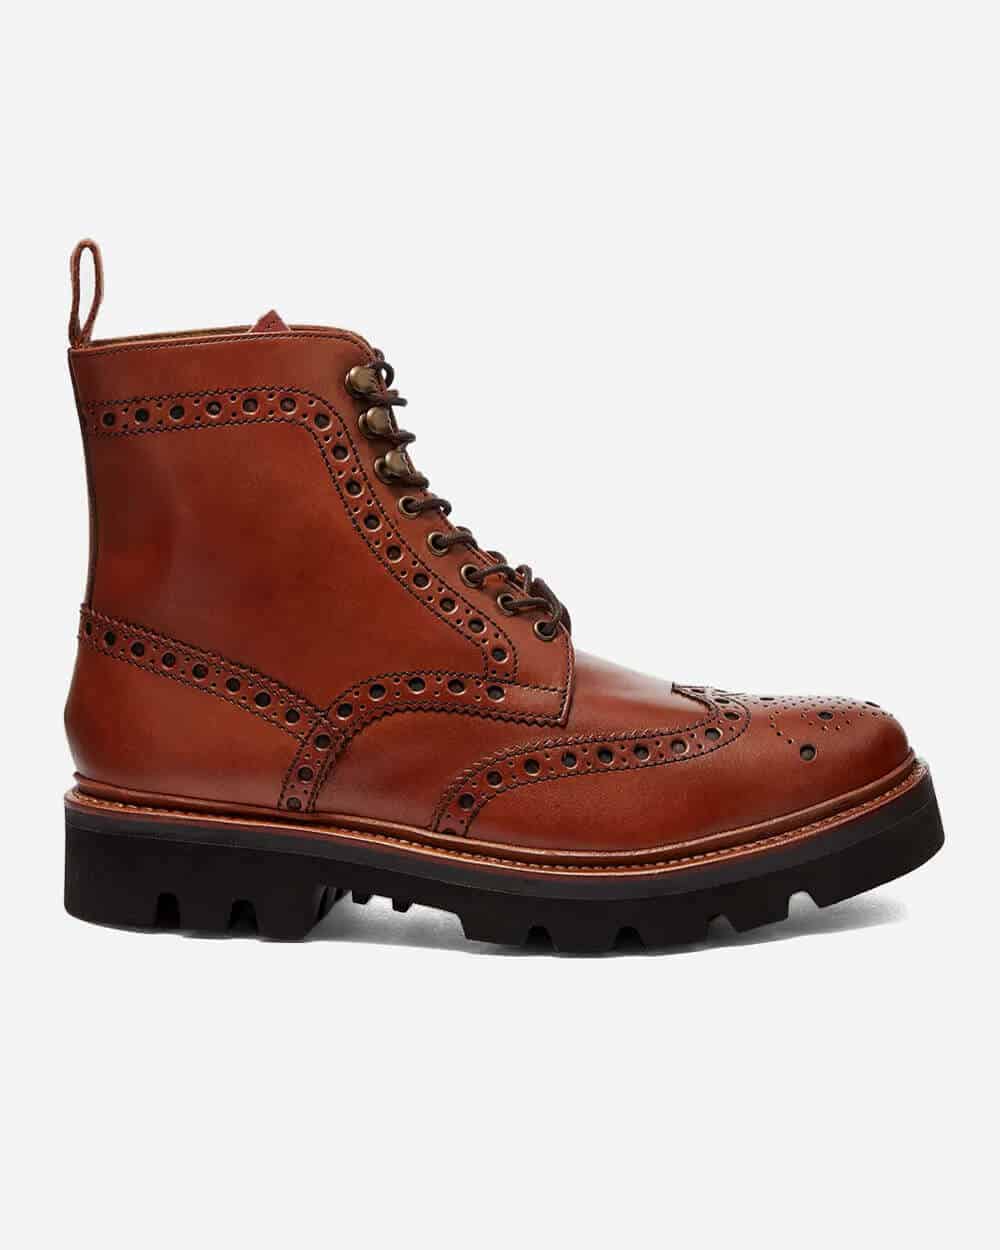 The Best Men's Boot Brands In The World (And The Model To Buy)